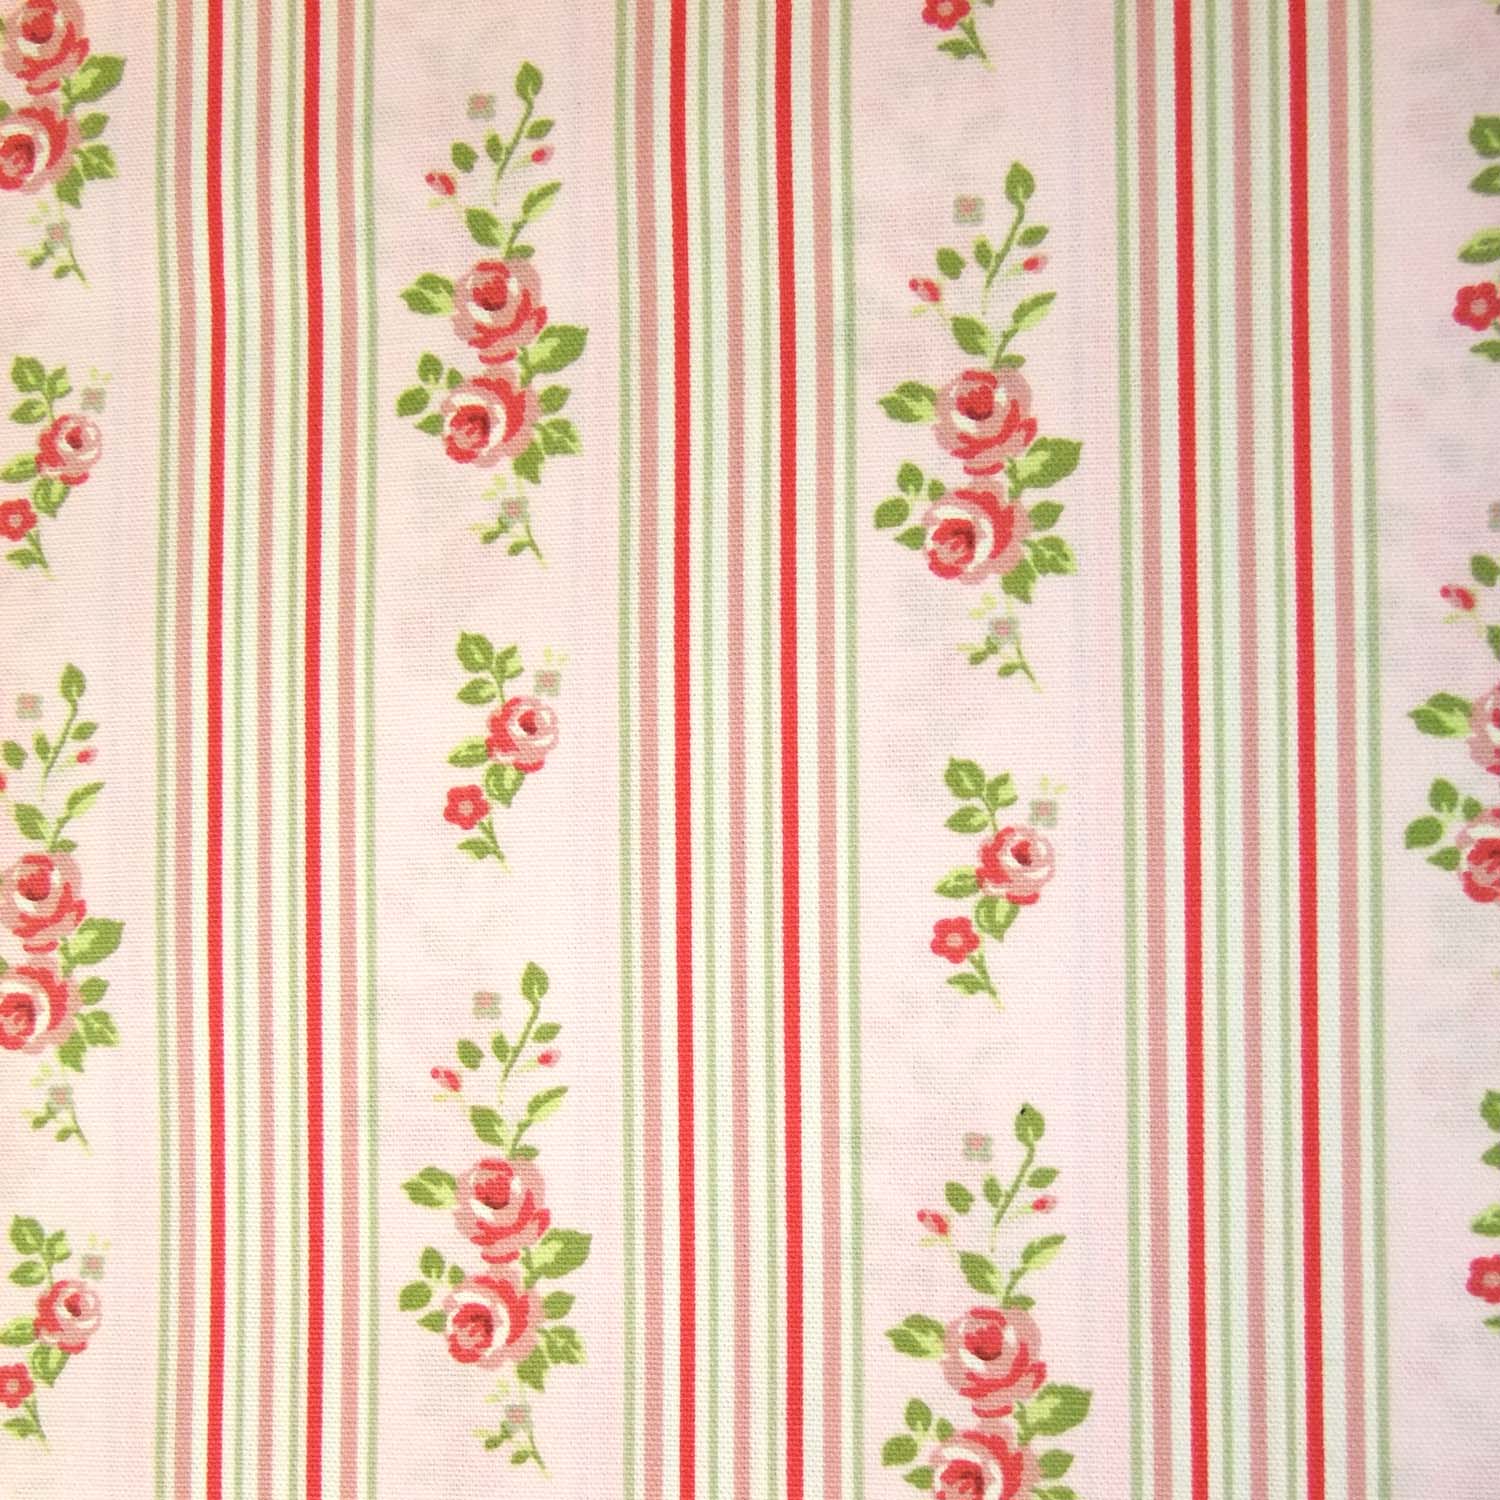 esdesign: Feature Fabric Friday: Vintage Classic Prints